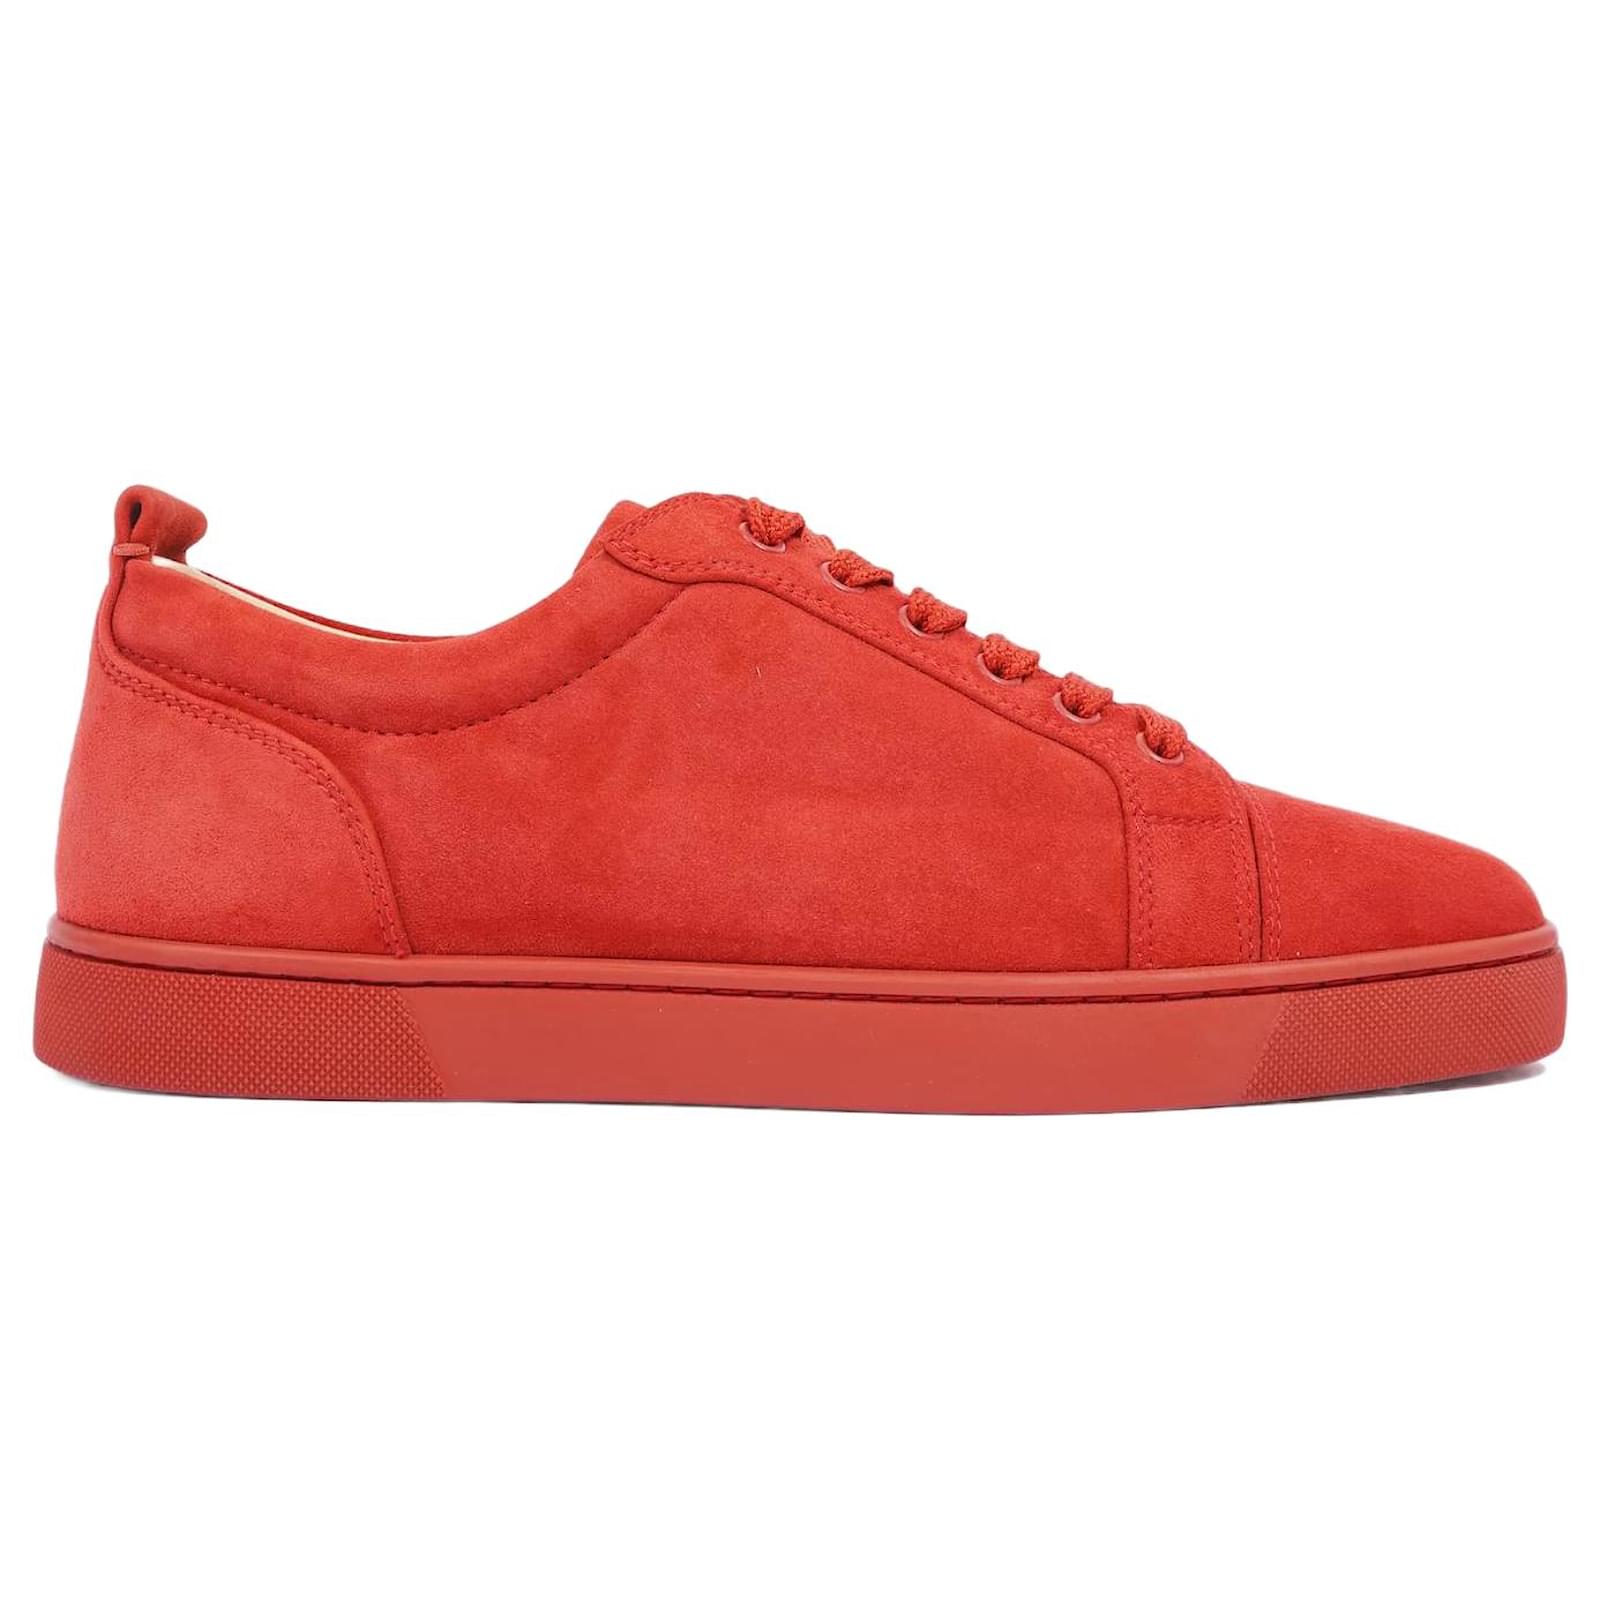 Christian Louboutin Suede Junior Spike Low Top Sneakers Size 41 Christian  Louboutin